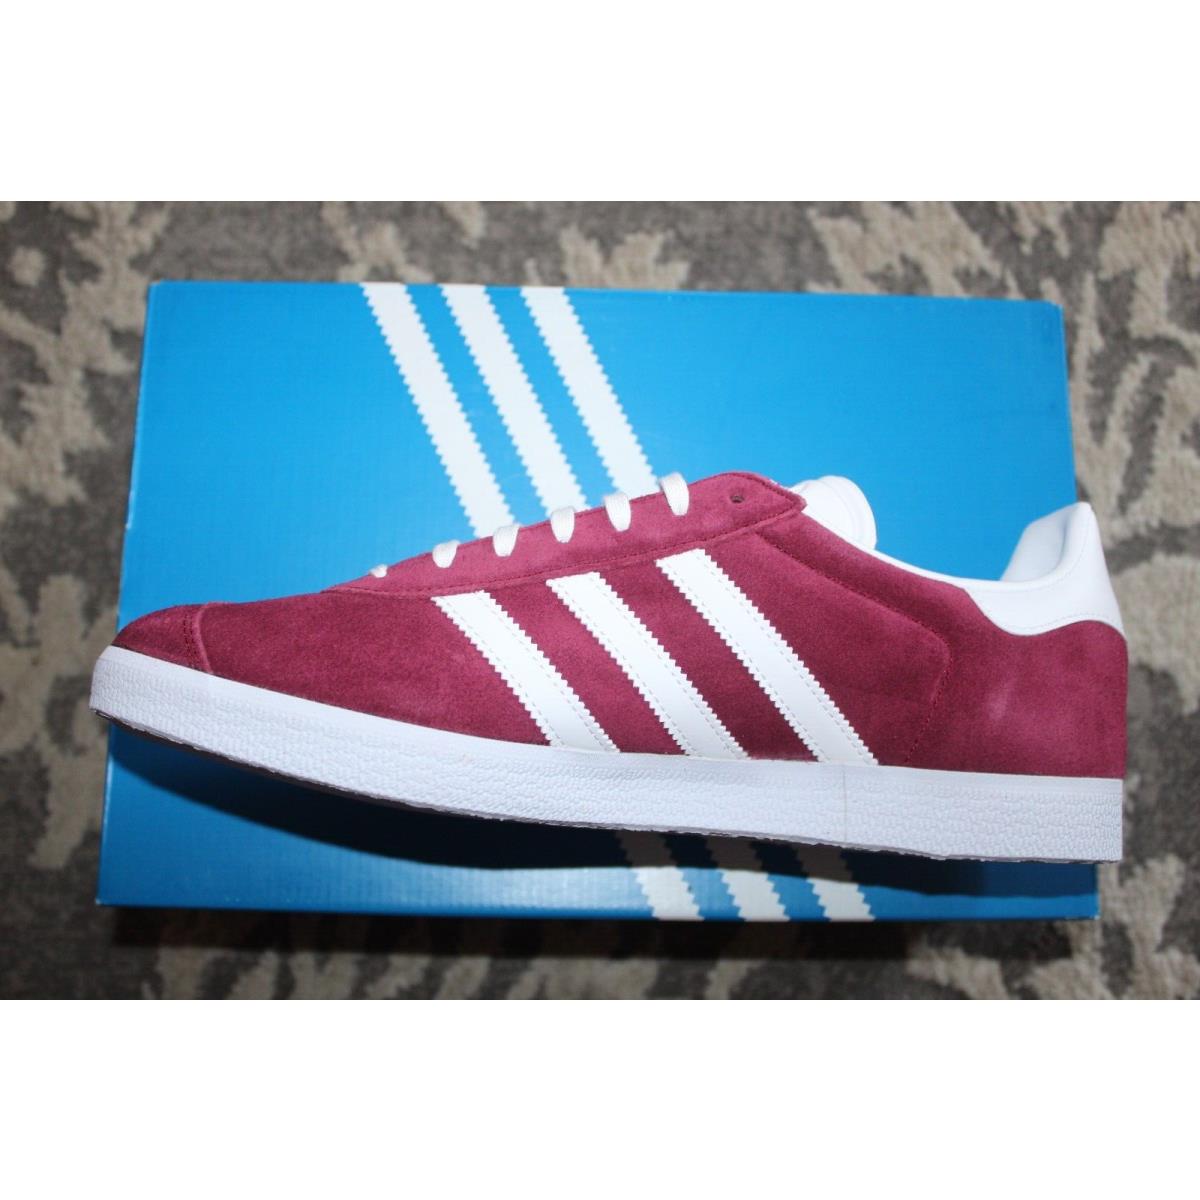 Adidas shoes Gazelle - Red 4